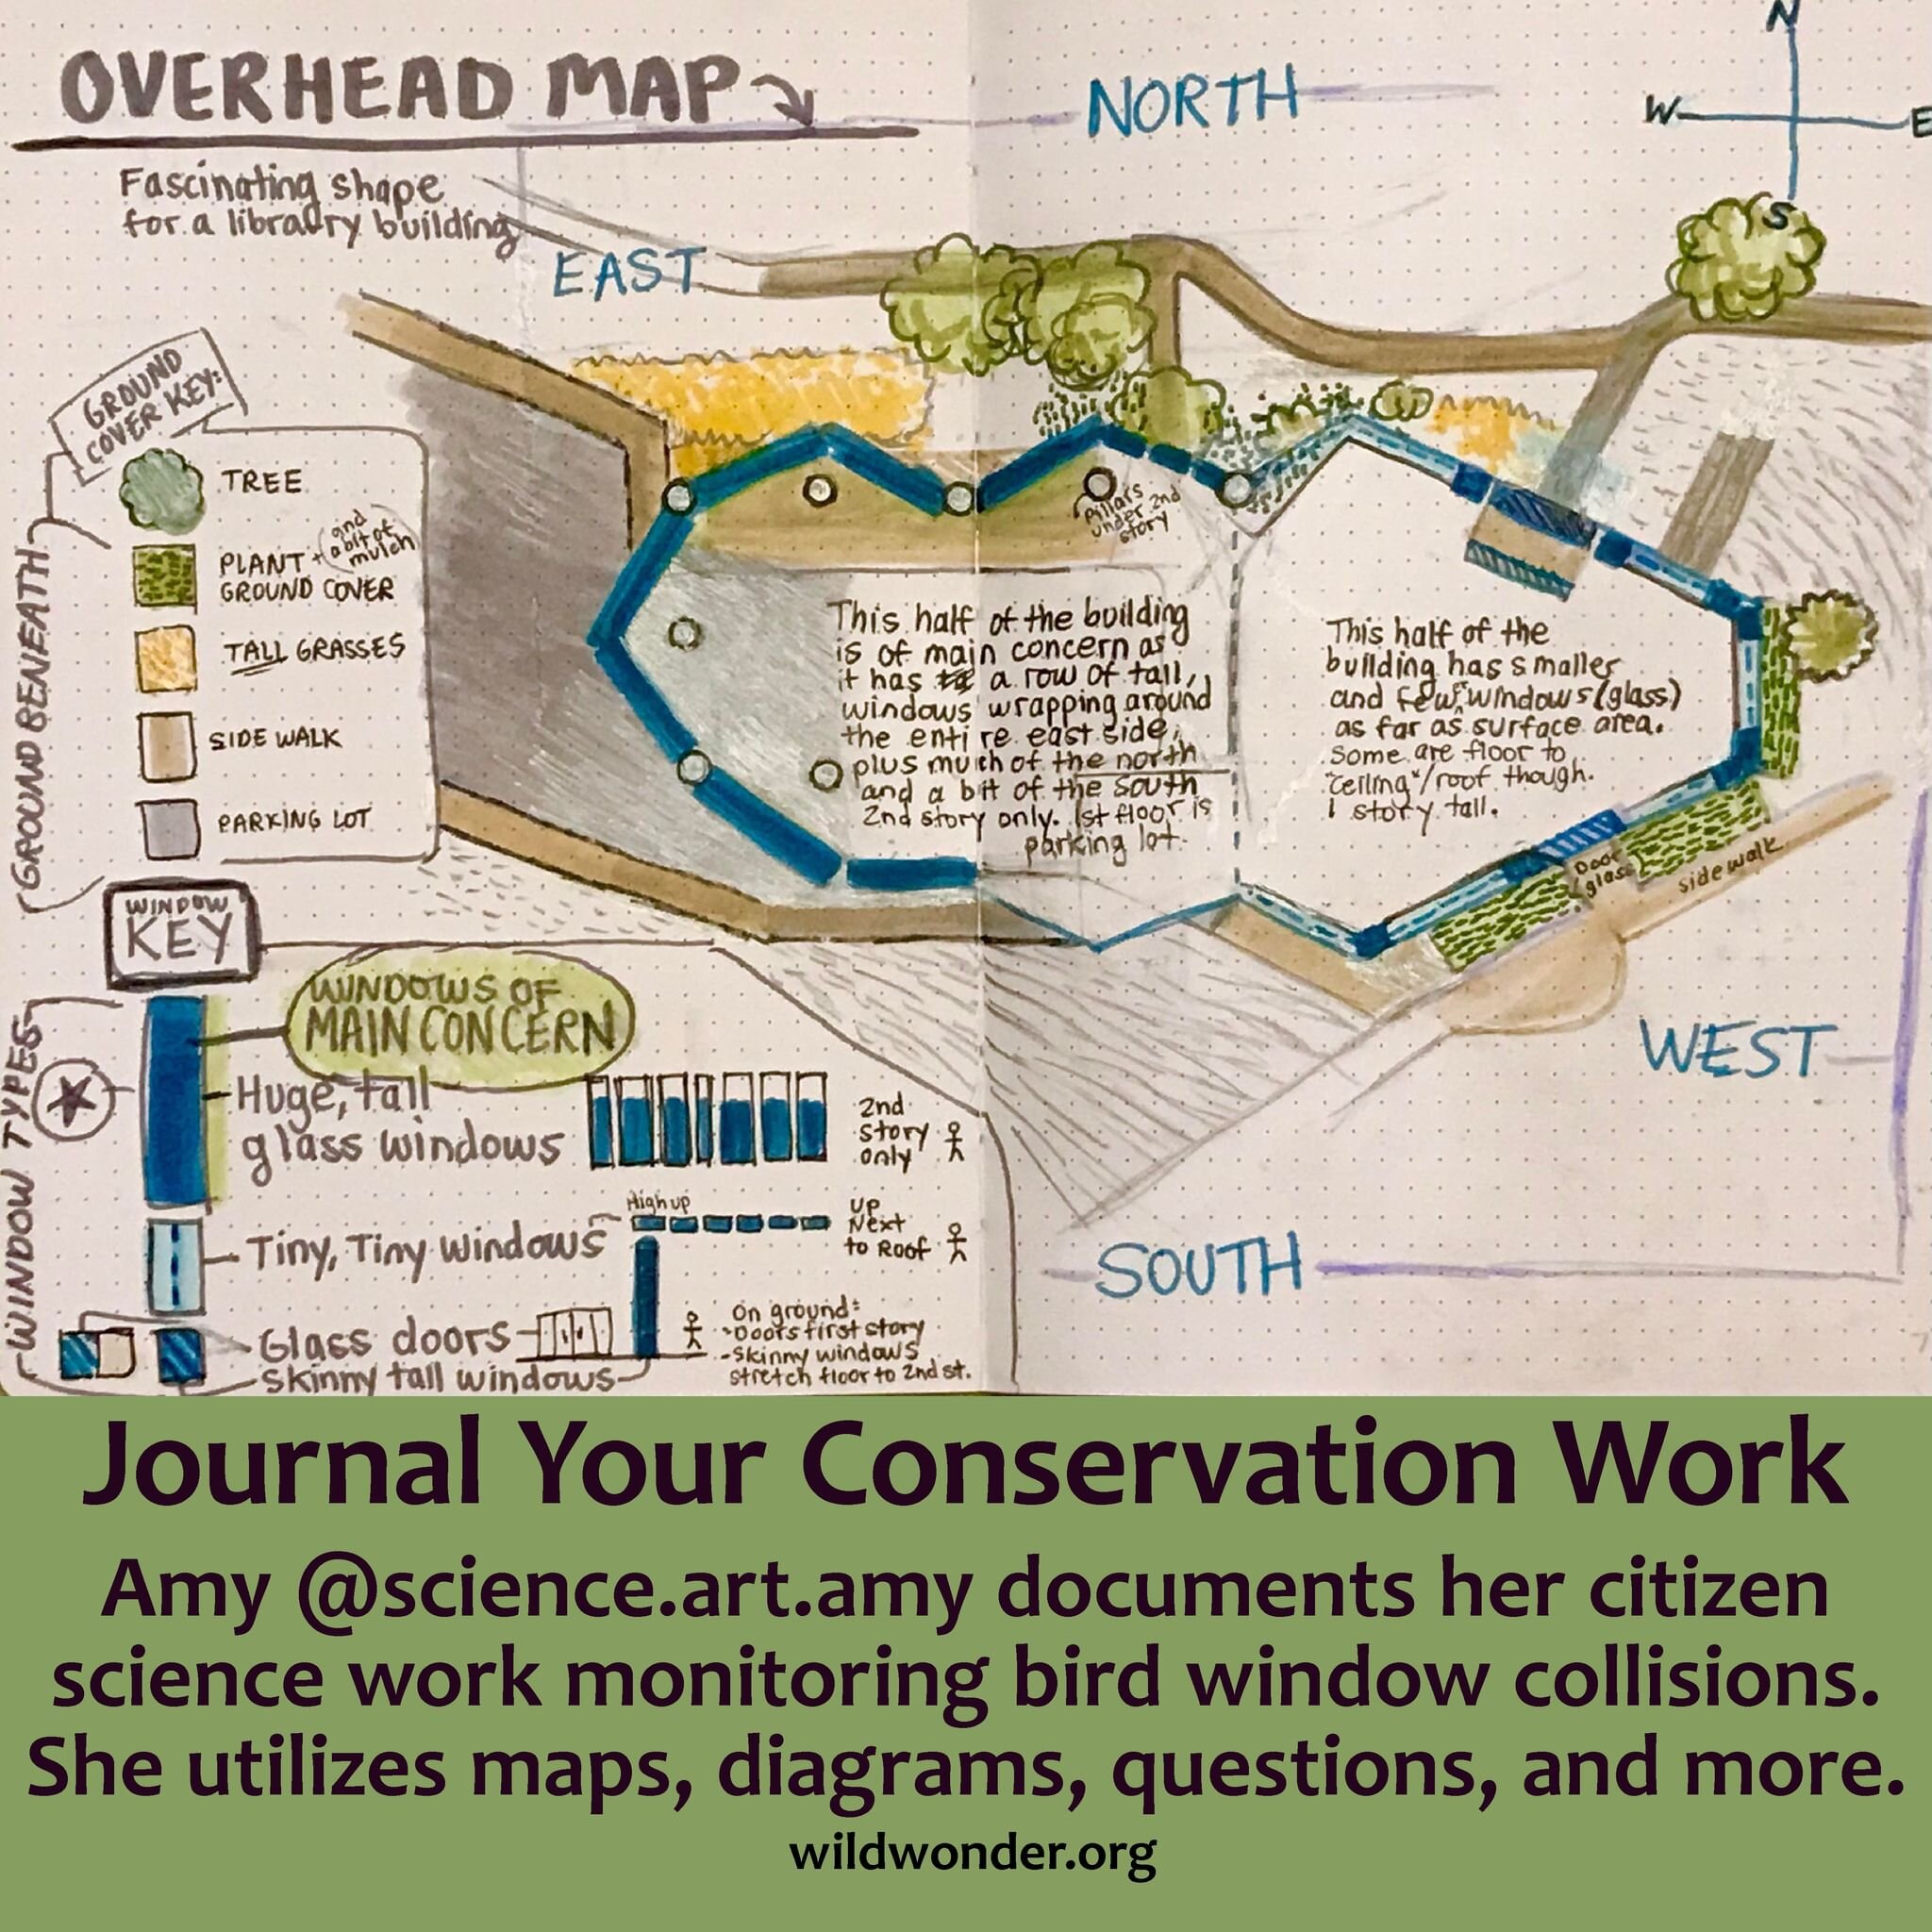 Journal Your Conservation Work: Amy @science.art.amy documents her citizen 
science work monitoring bird window collisions for Madison Audubon. She utilizes maps, diagrams, questions, and more. She uses her nature journal to help her think on the pag